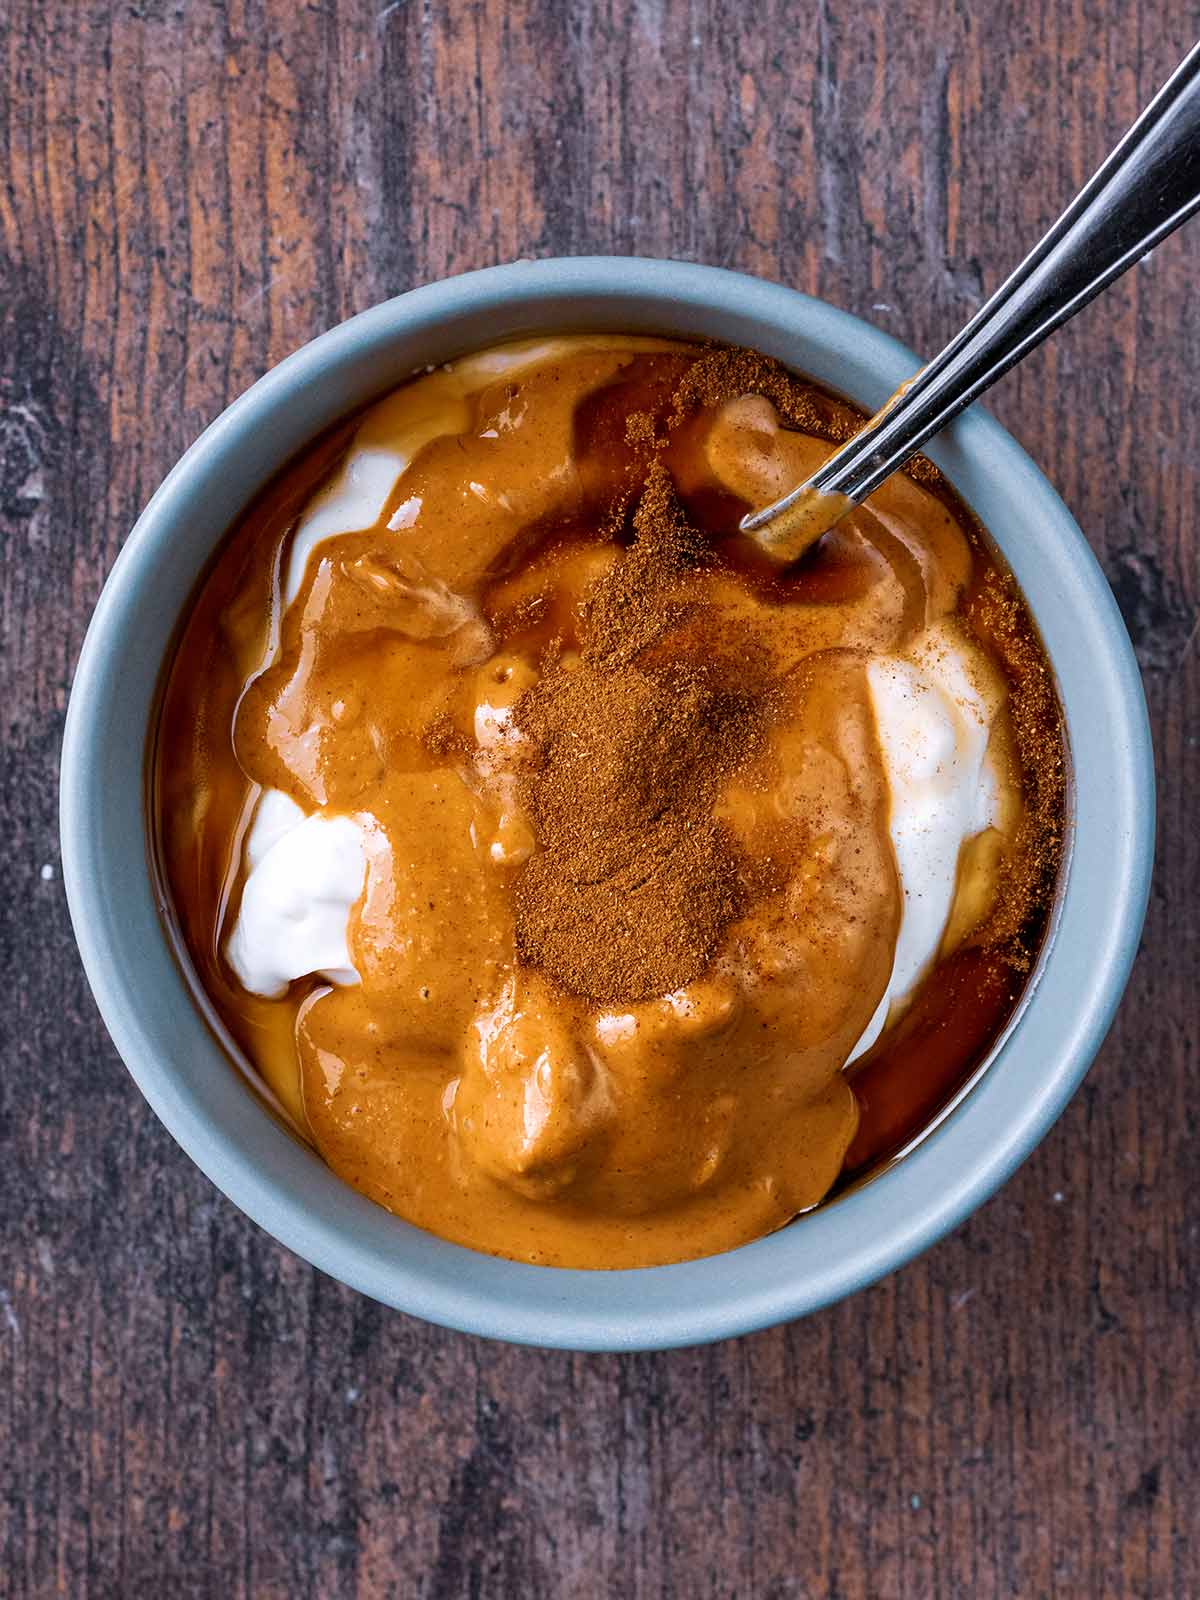 Yogurt, peanut butter, maple syrup and cinnamon in a bowl with a spoon.